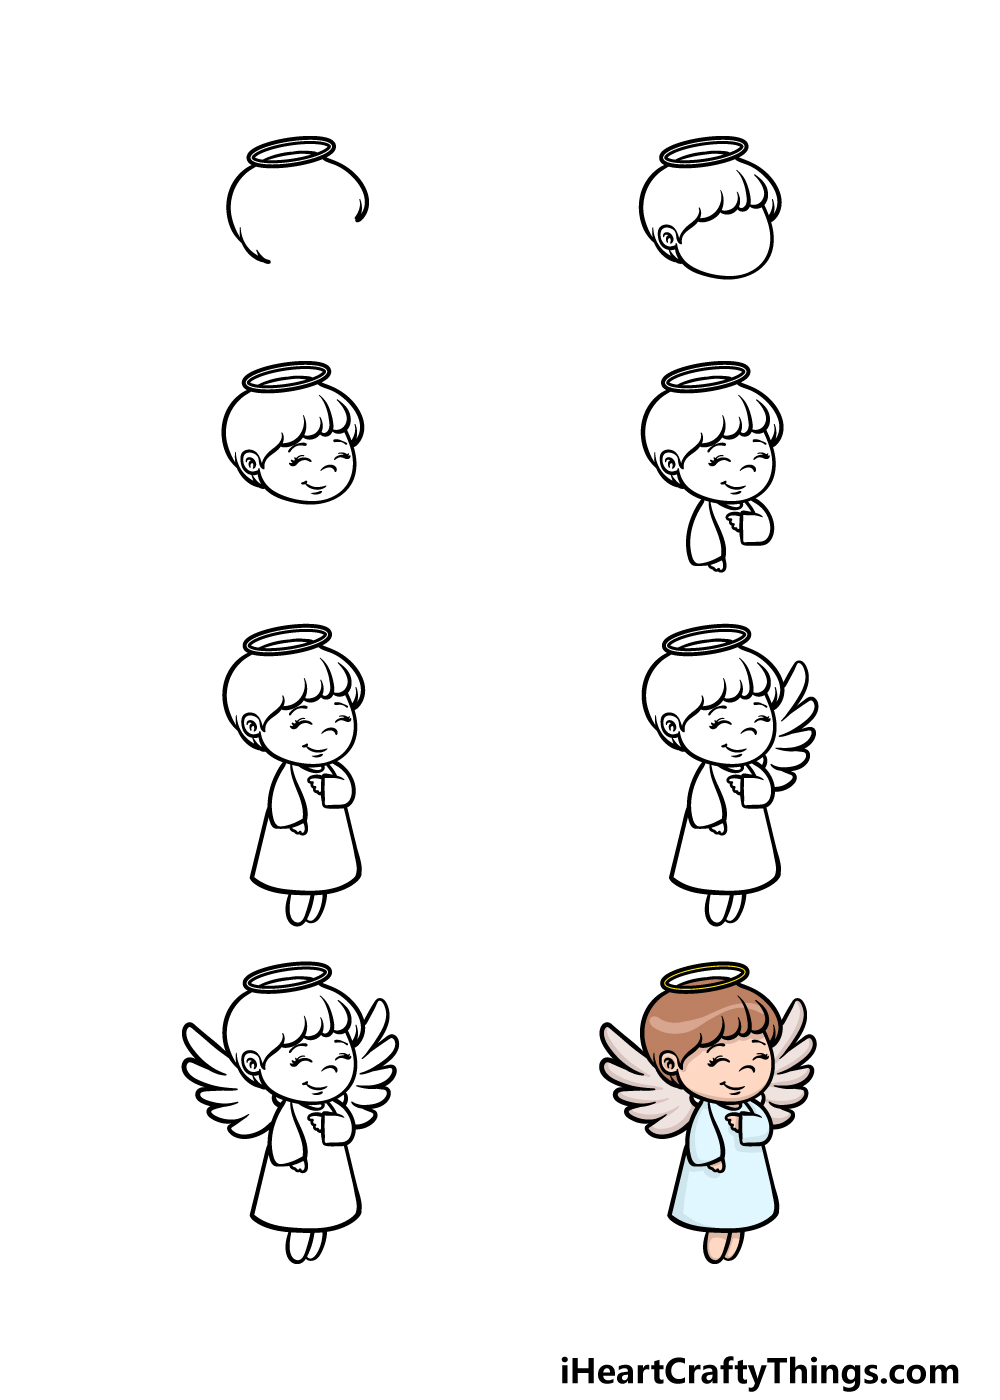 brandon roman recommends How To Draw Cartoon Angel